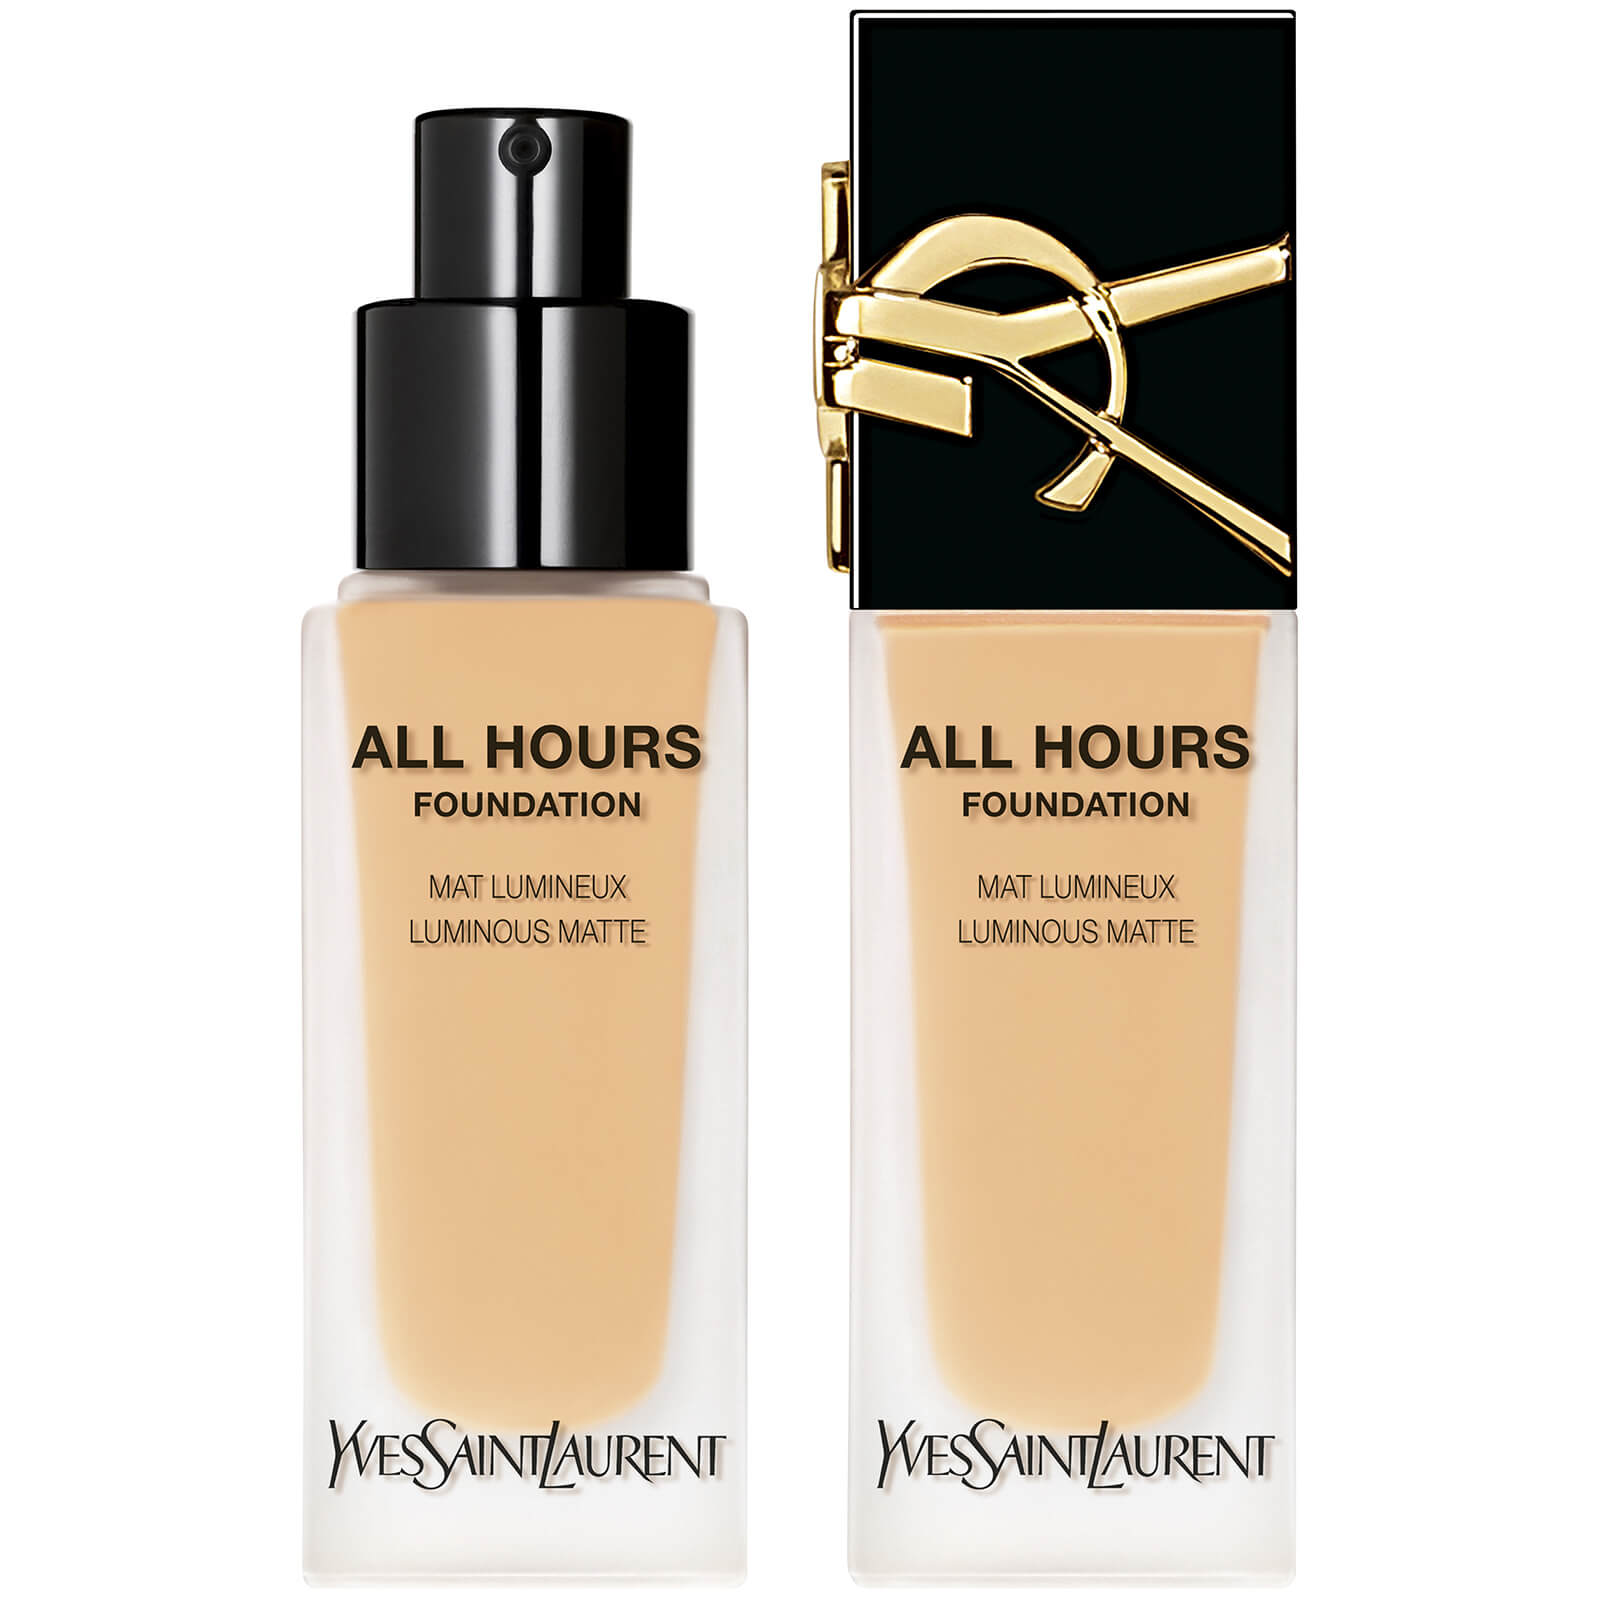 Yves Saint Laurent All Hours Luminous Matte Foundation with SPF 39 25ml (Various Shades) - LW4 von Ysl